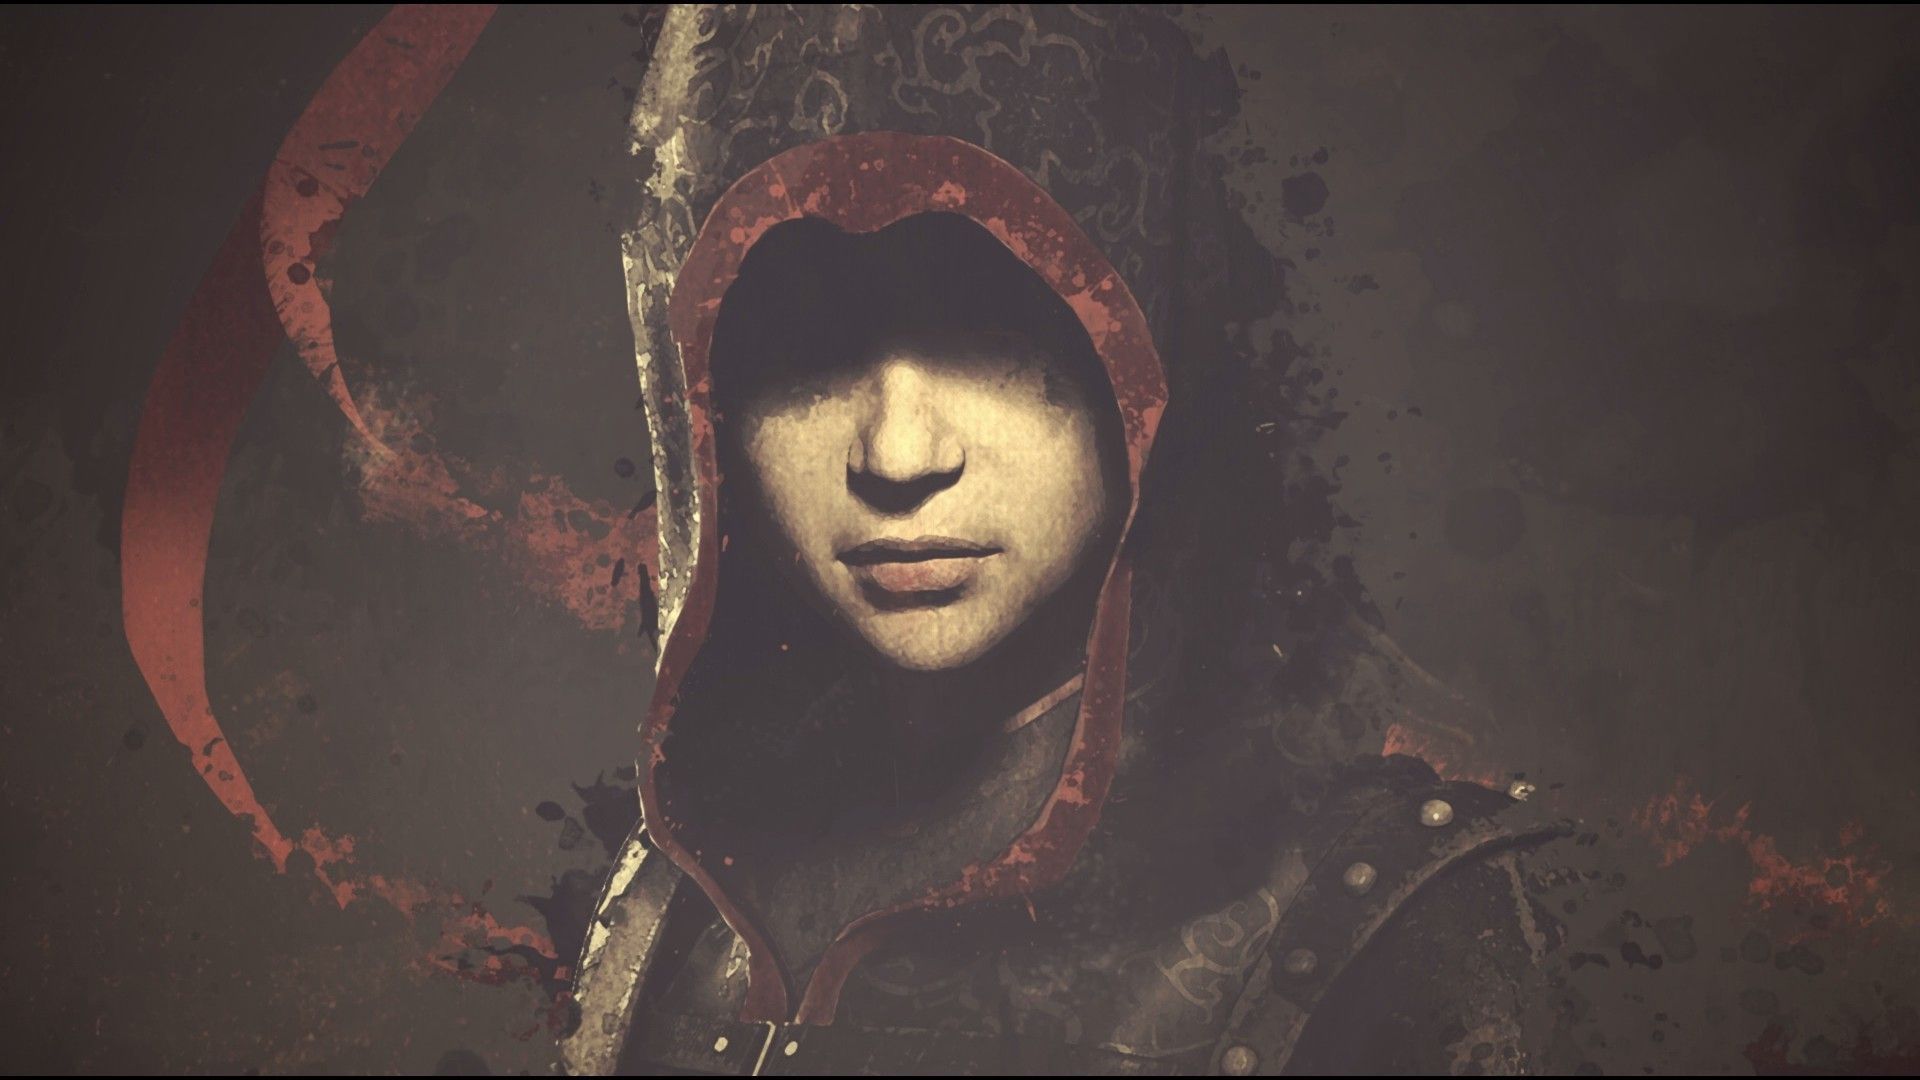 Download Wallpaper Chinese Order, Assassin's creed, Shao Yun, Assassin's Creed Chronicles: Chin. Assassins creed, Assassin's creed chronicles, Assassins creed art